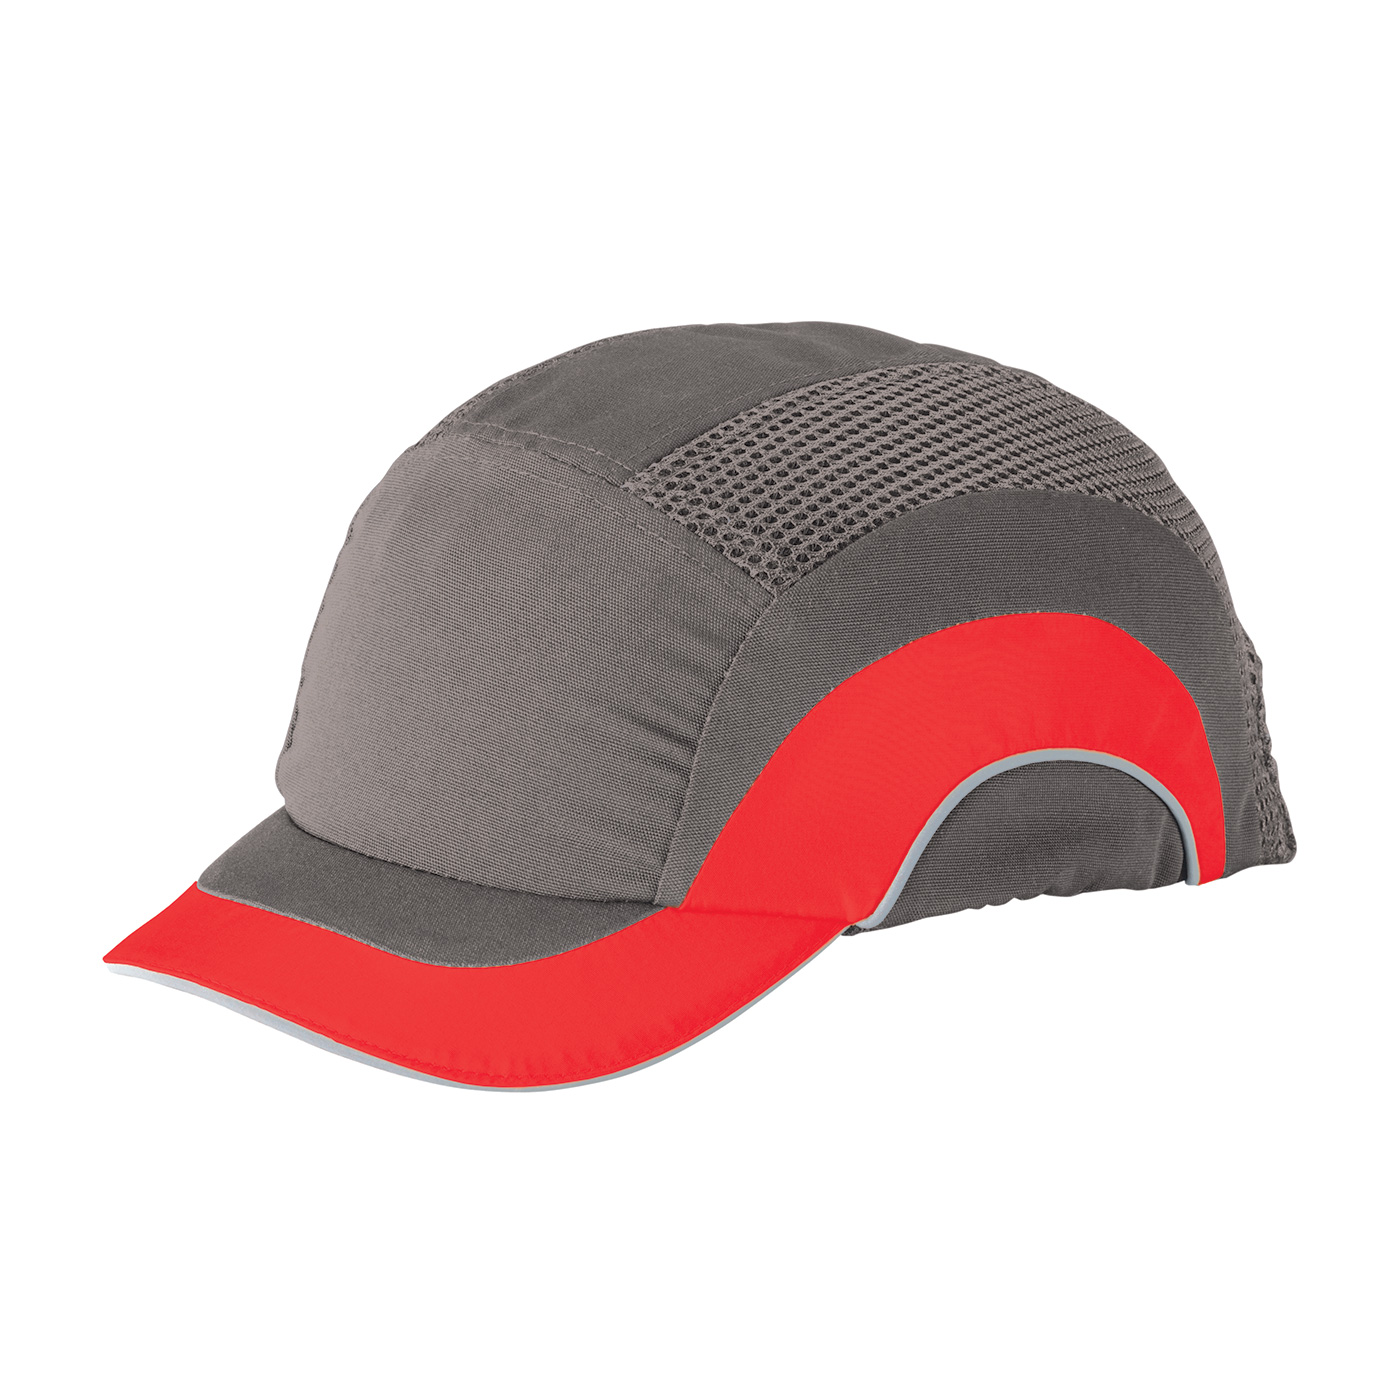 282-ABS150 PIP® HardCap A1+™ Low Profile Baseball Style Bump Cap with HDPE Protective Liner and 2` Short Brim - Red/Gray